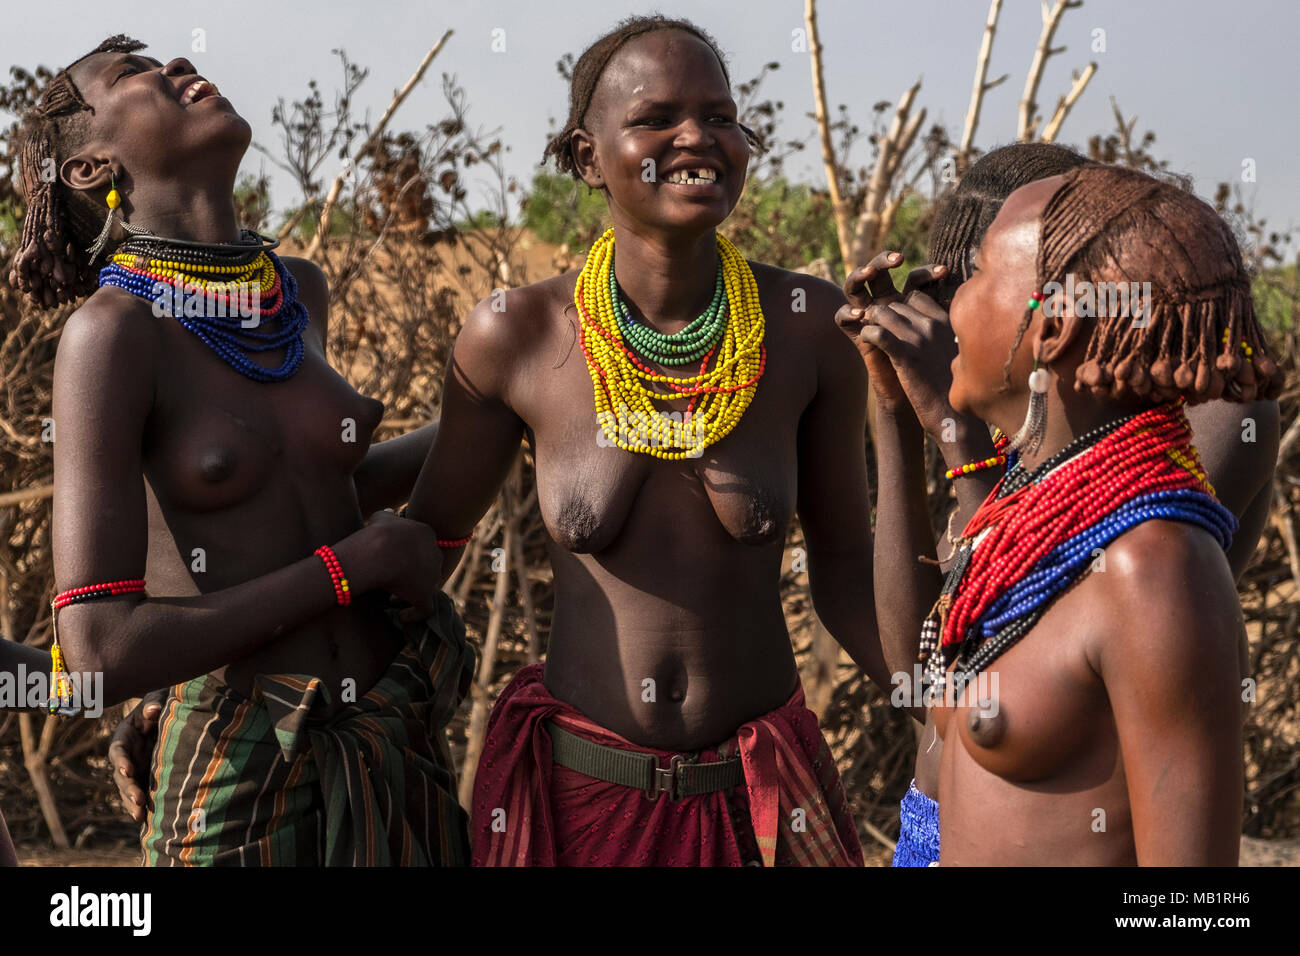 Omorate, Ethiopia - January 25, 2018: Women from Dassanech tribe posing for a portrait in their village near the Omorate river in Ethiopia. Stock Photo